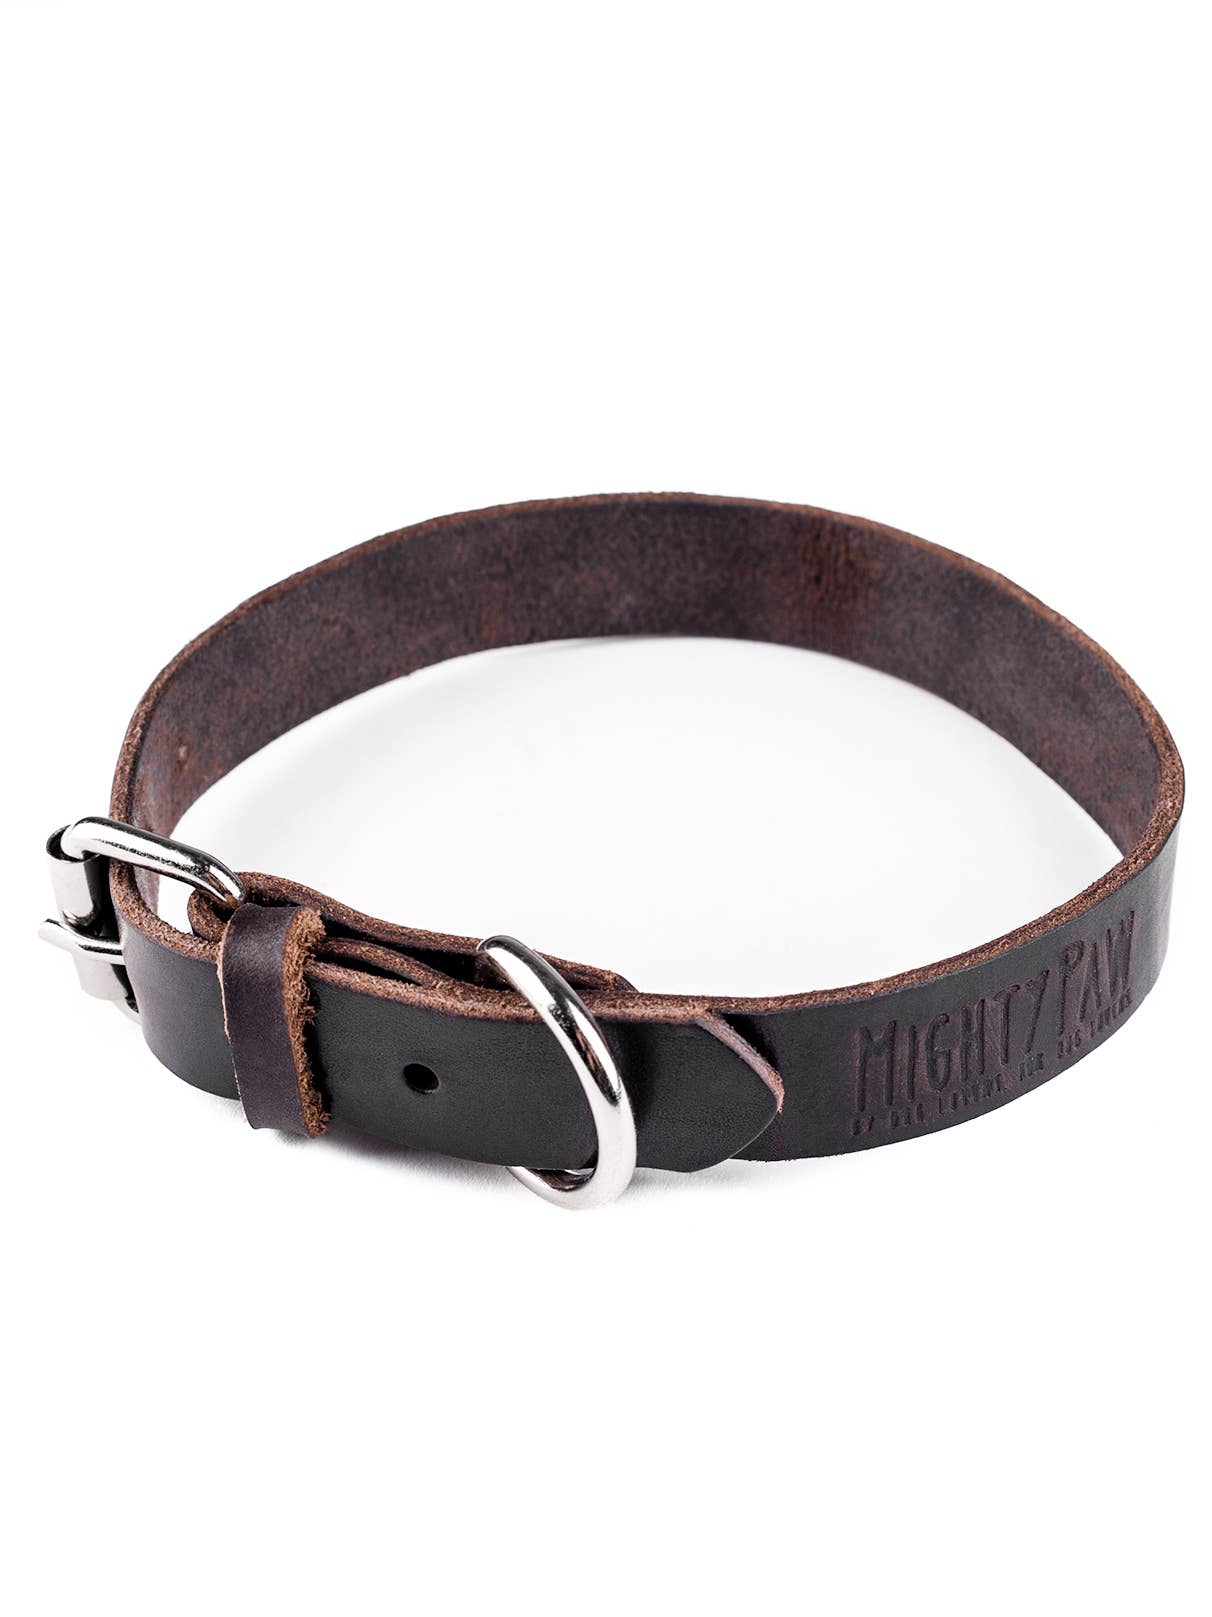 Mighty Paw Distressed Leather Dog Collar & Leash Small / Brown - Paw Naturals